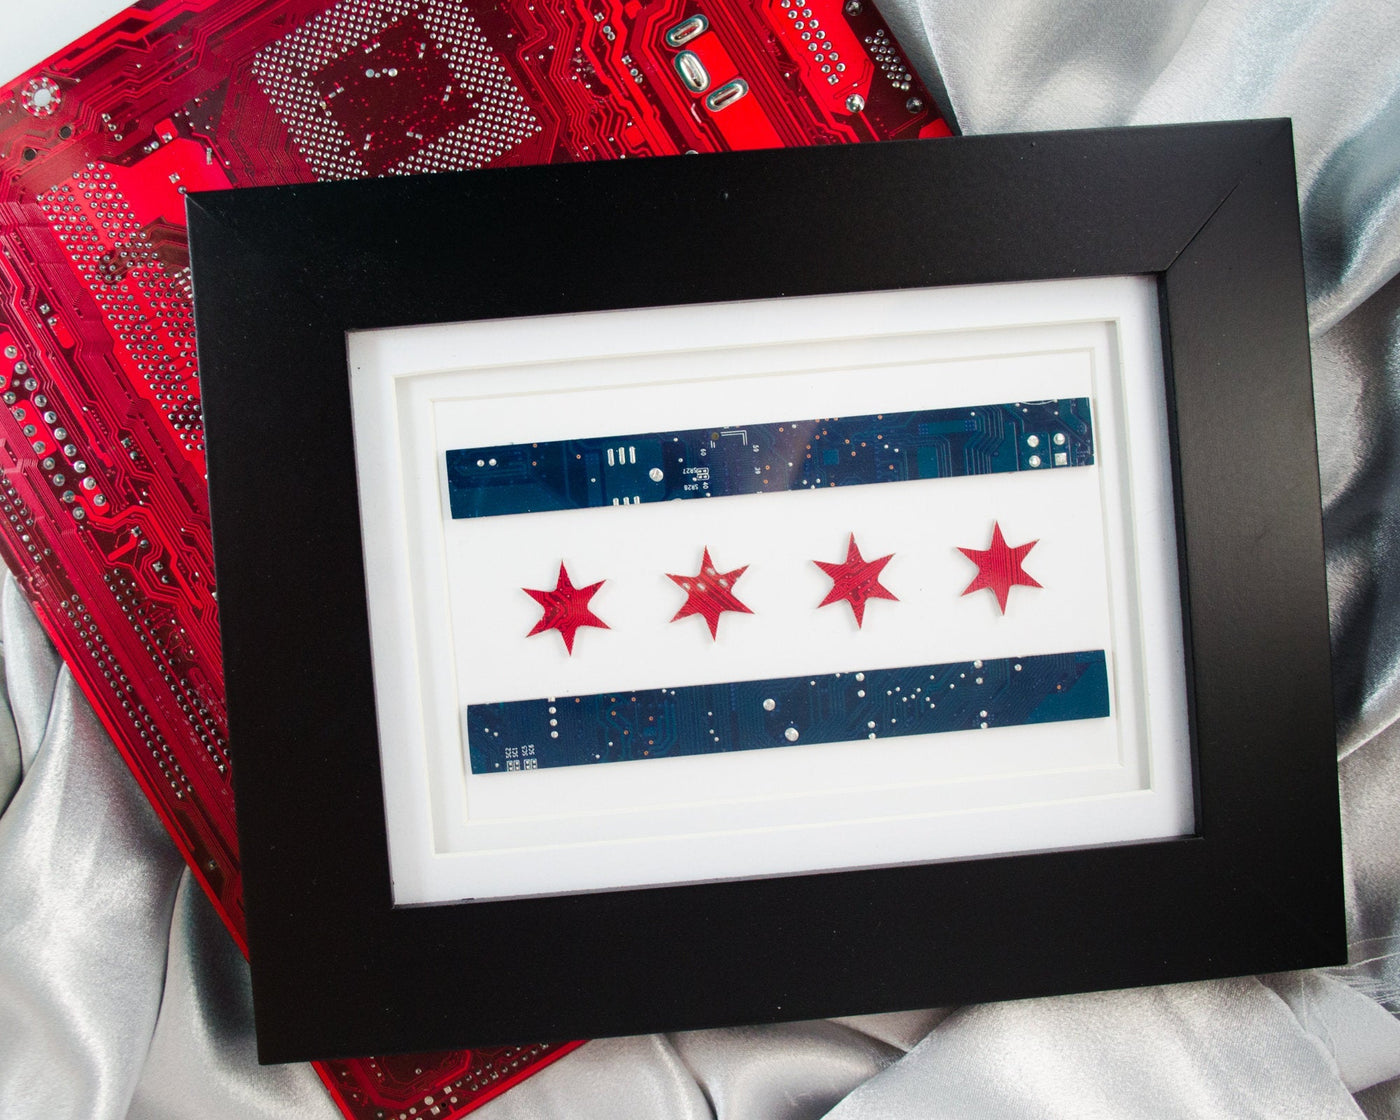 circuit board framed art made into shape of Chicago flag